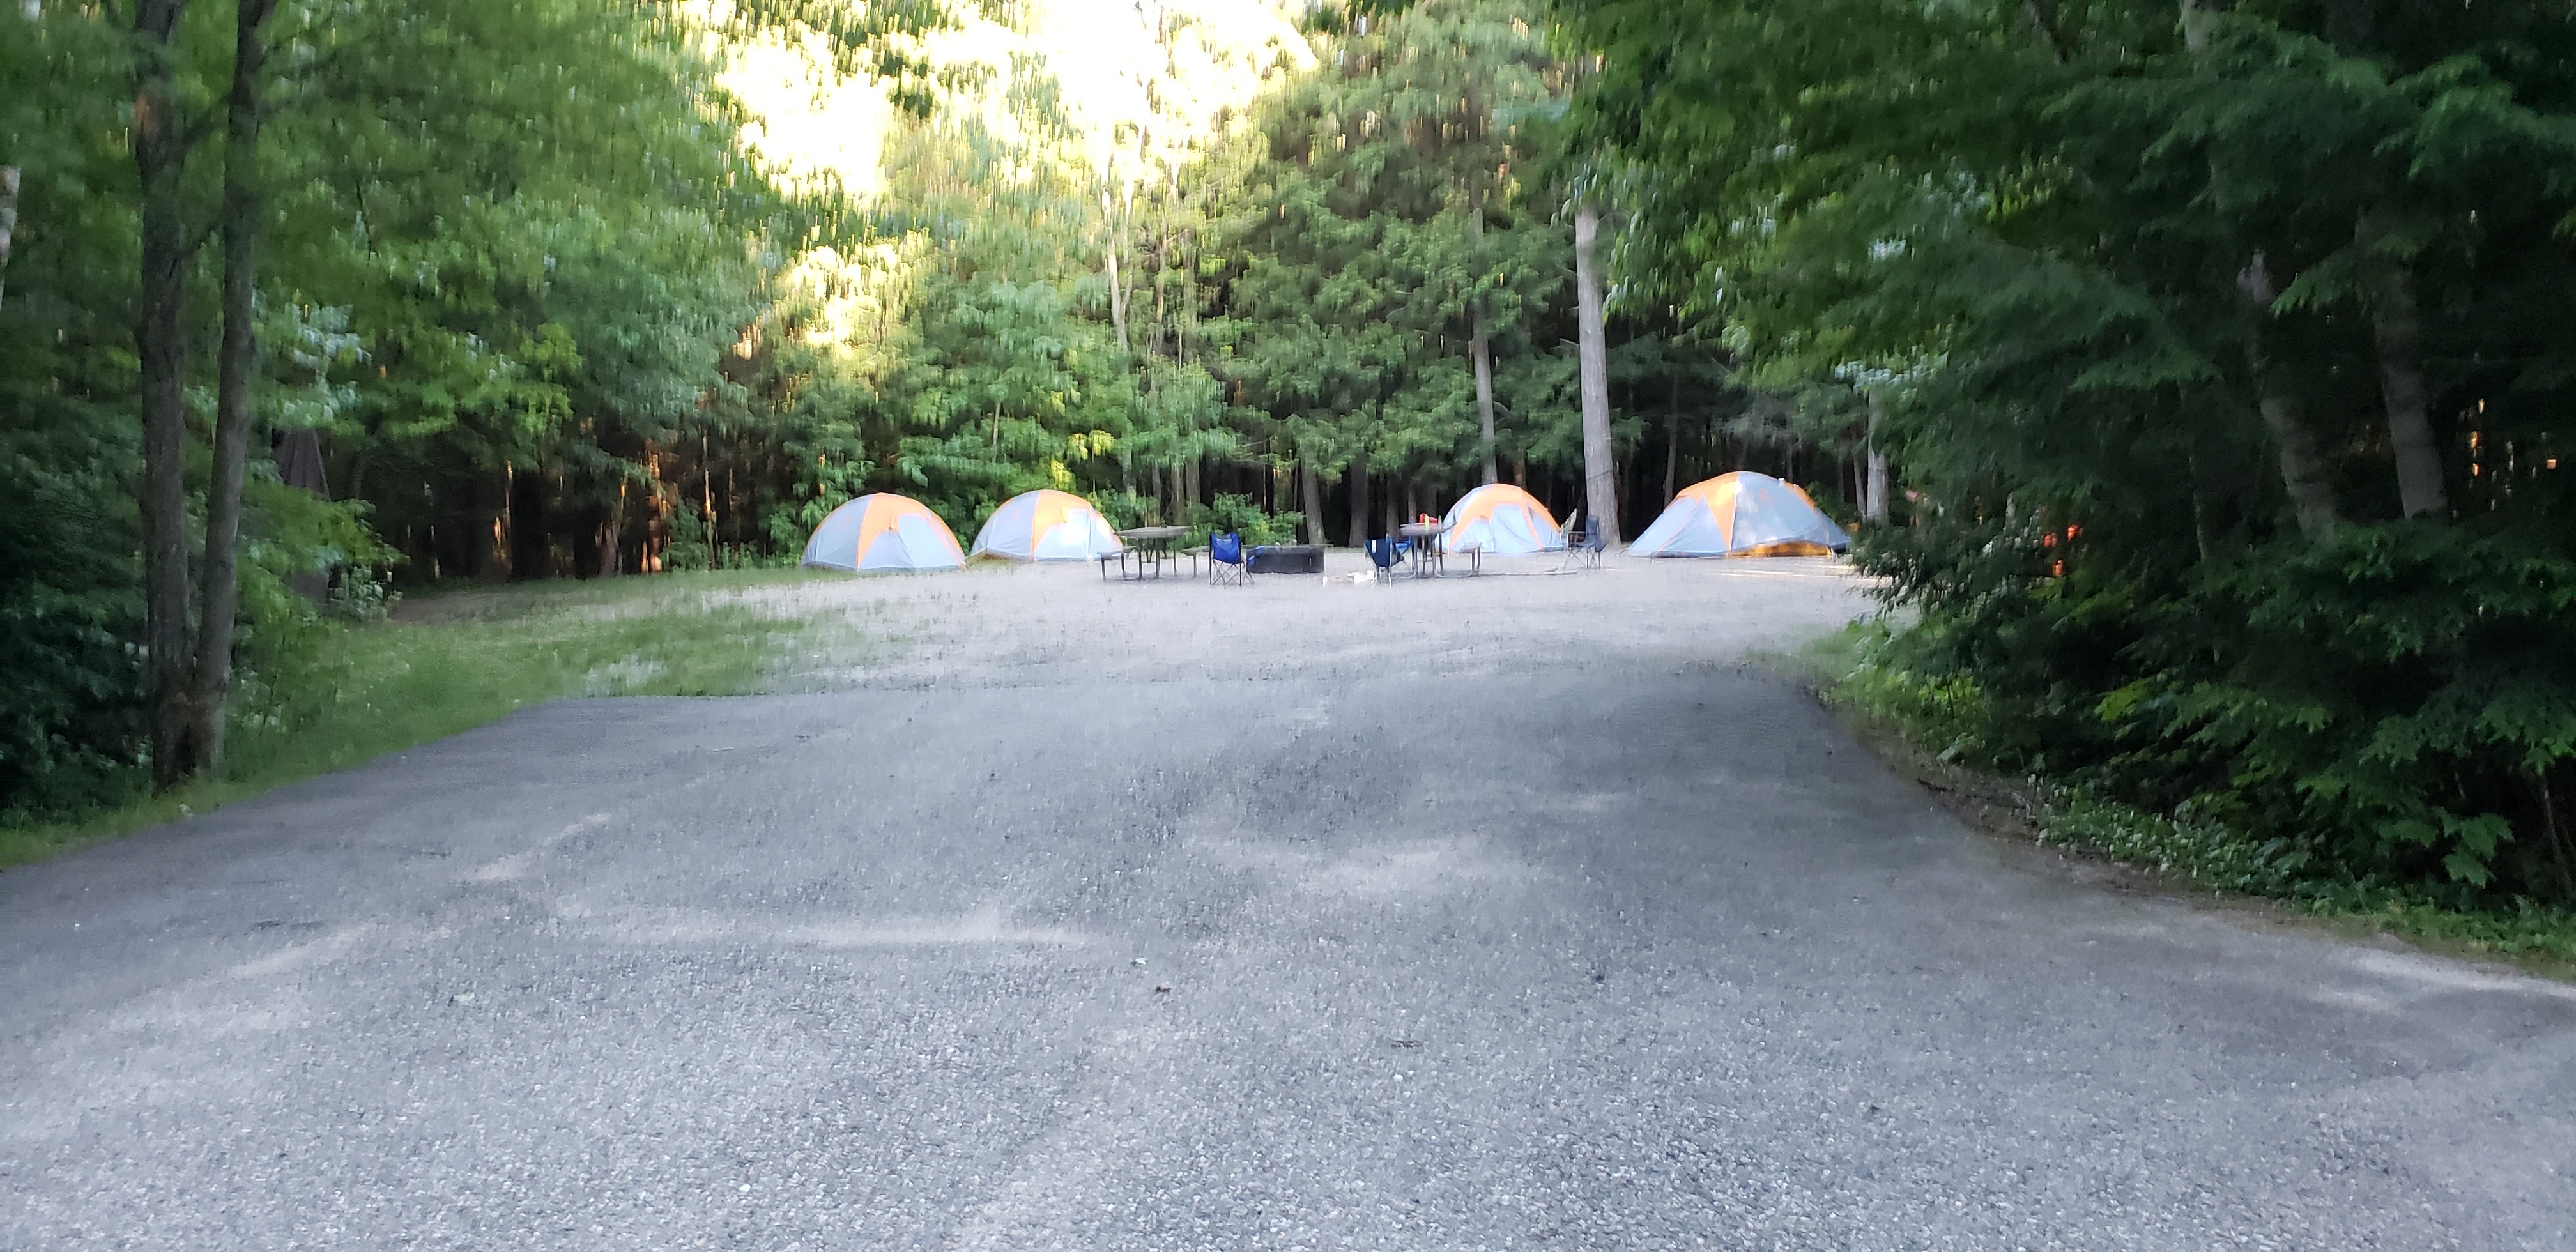 Camper submitted image from Barnes Field Campground - 5